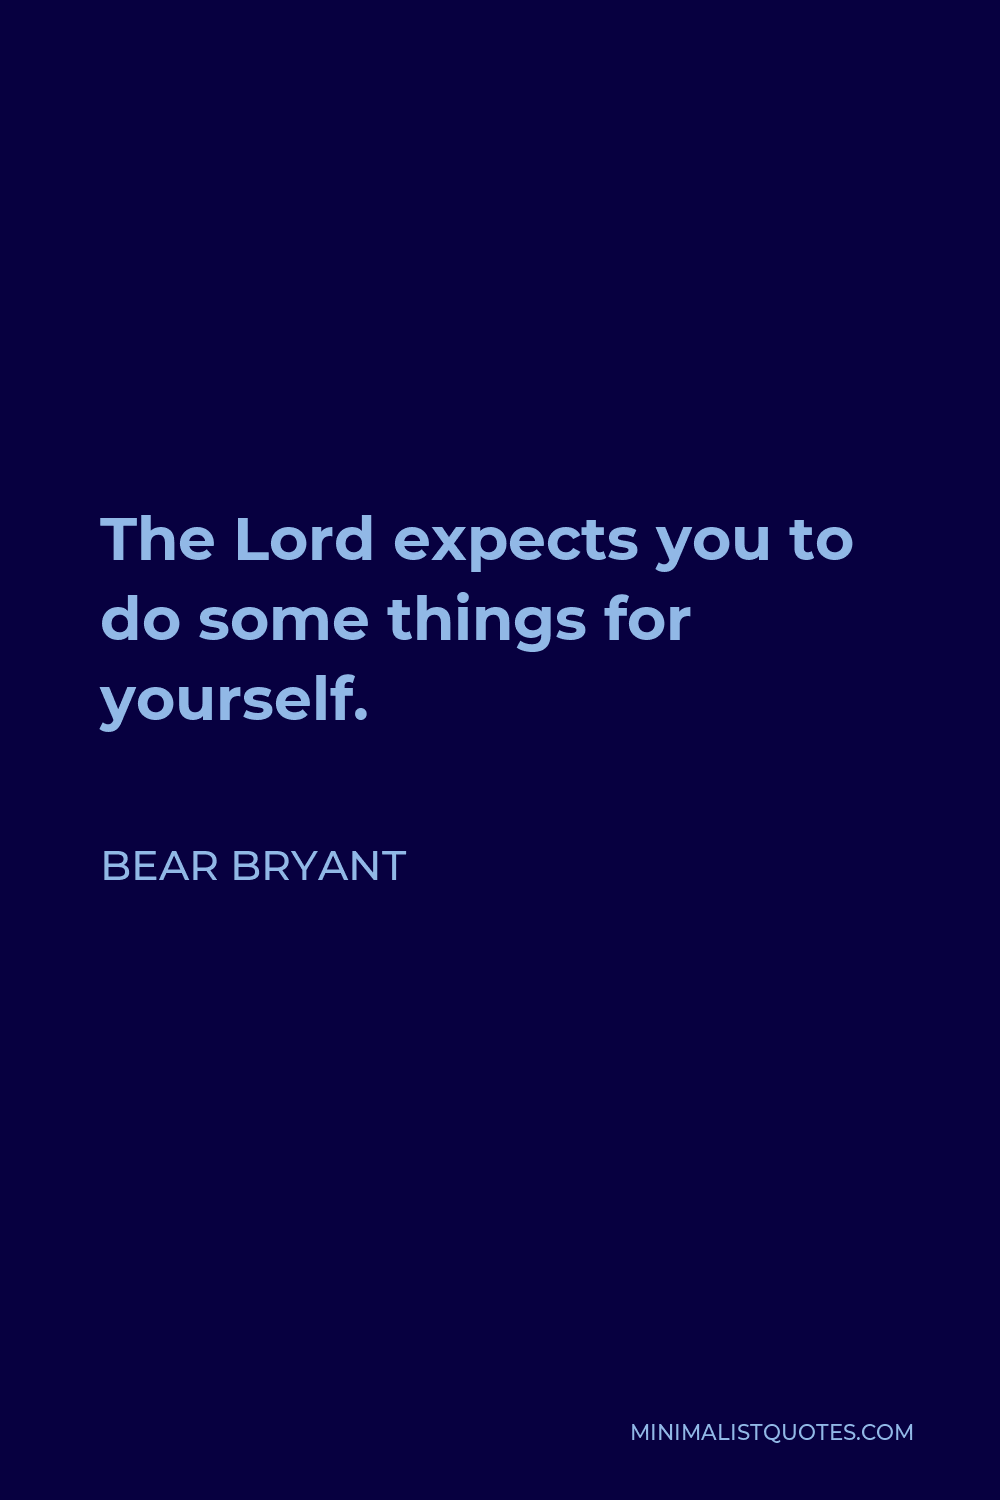 Bear Bryant Quote - The Lord expects you to do some things for yourself.